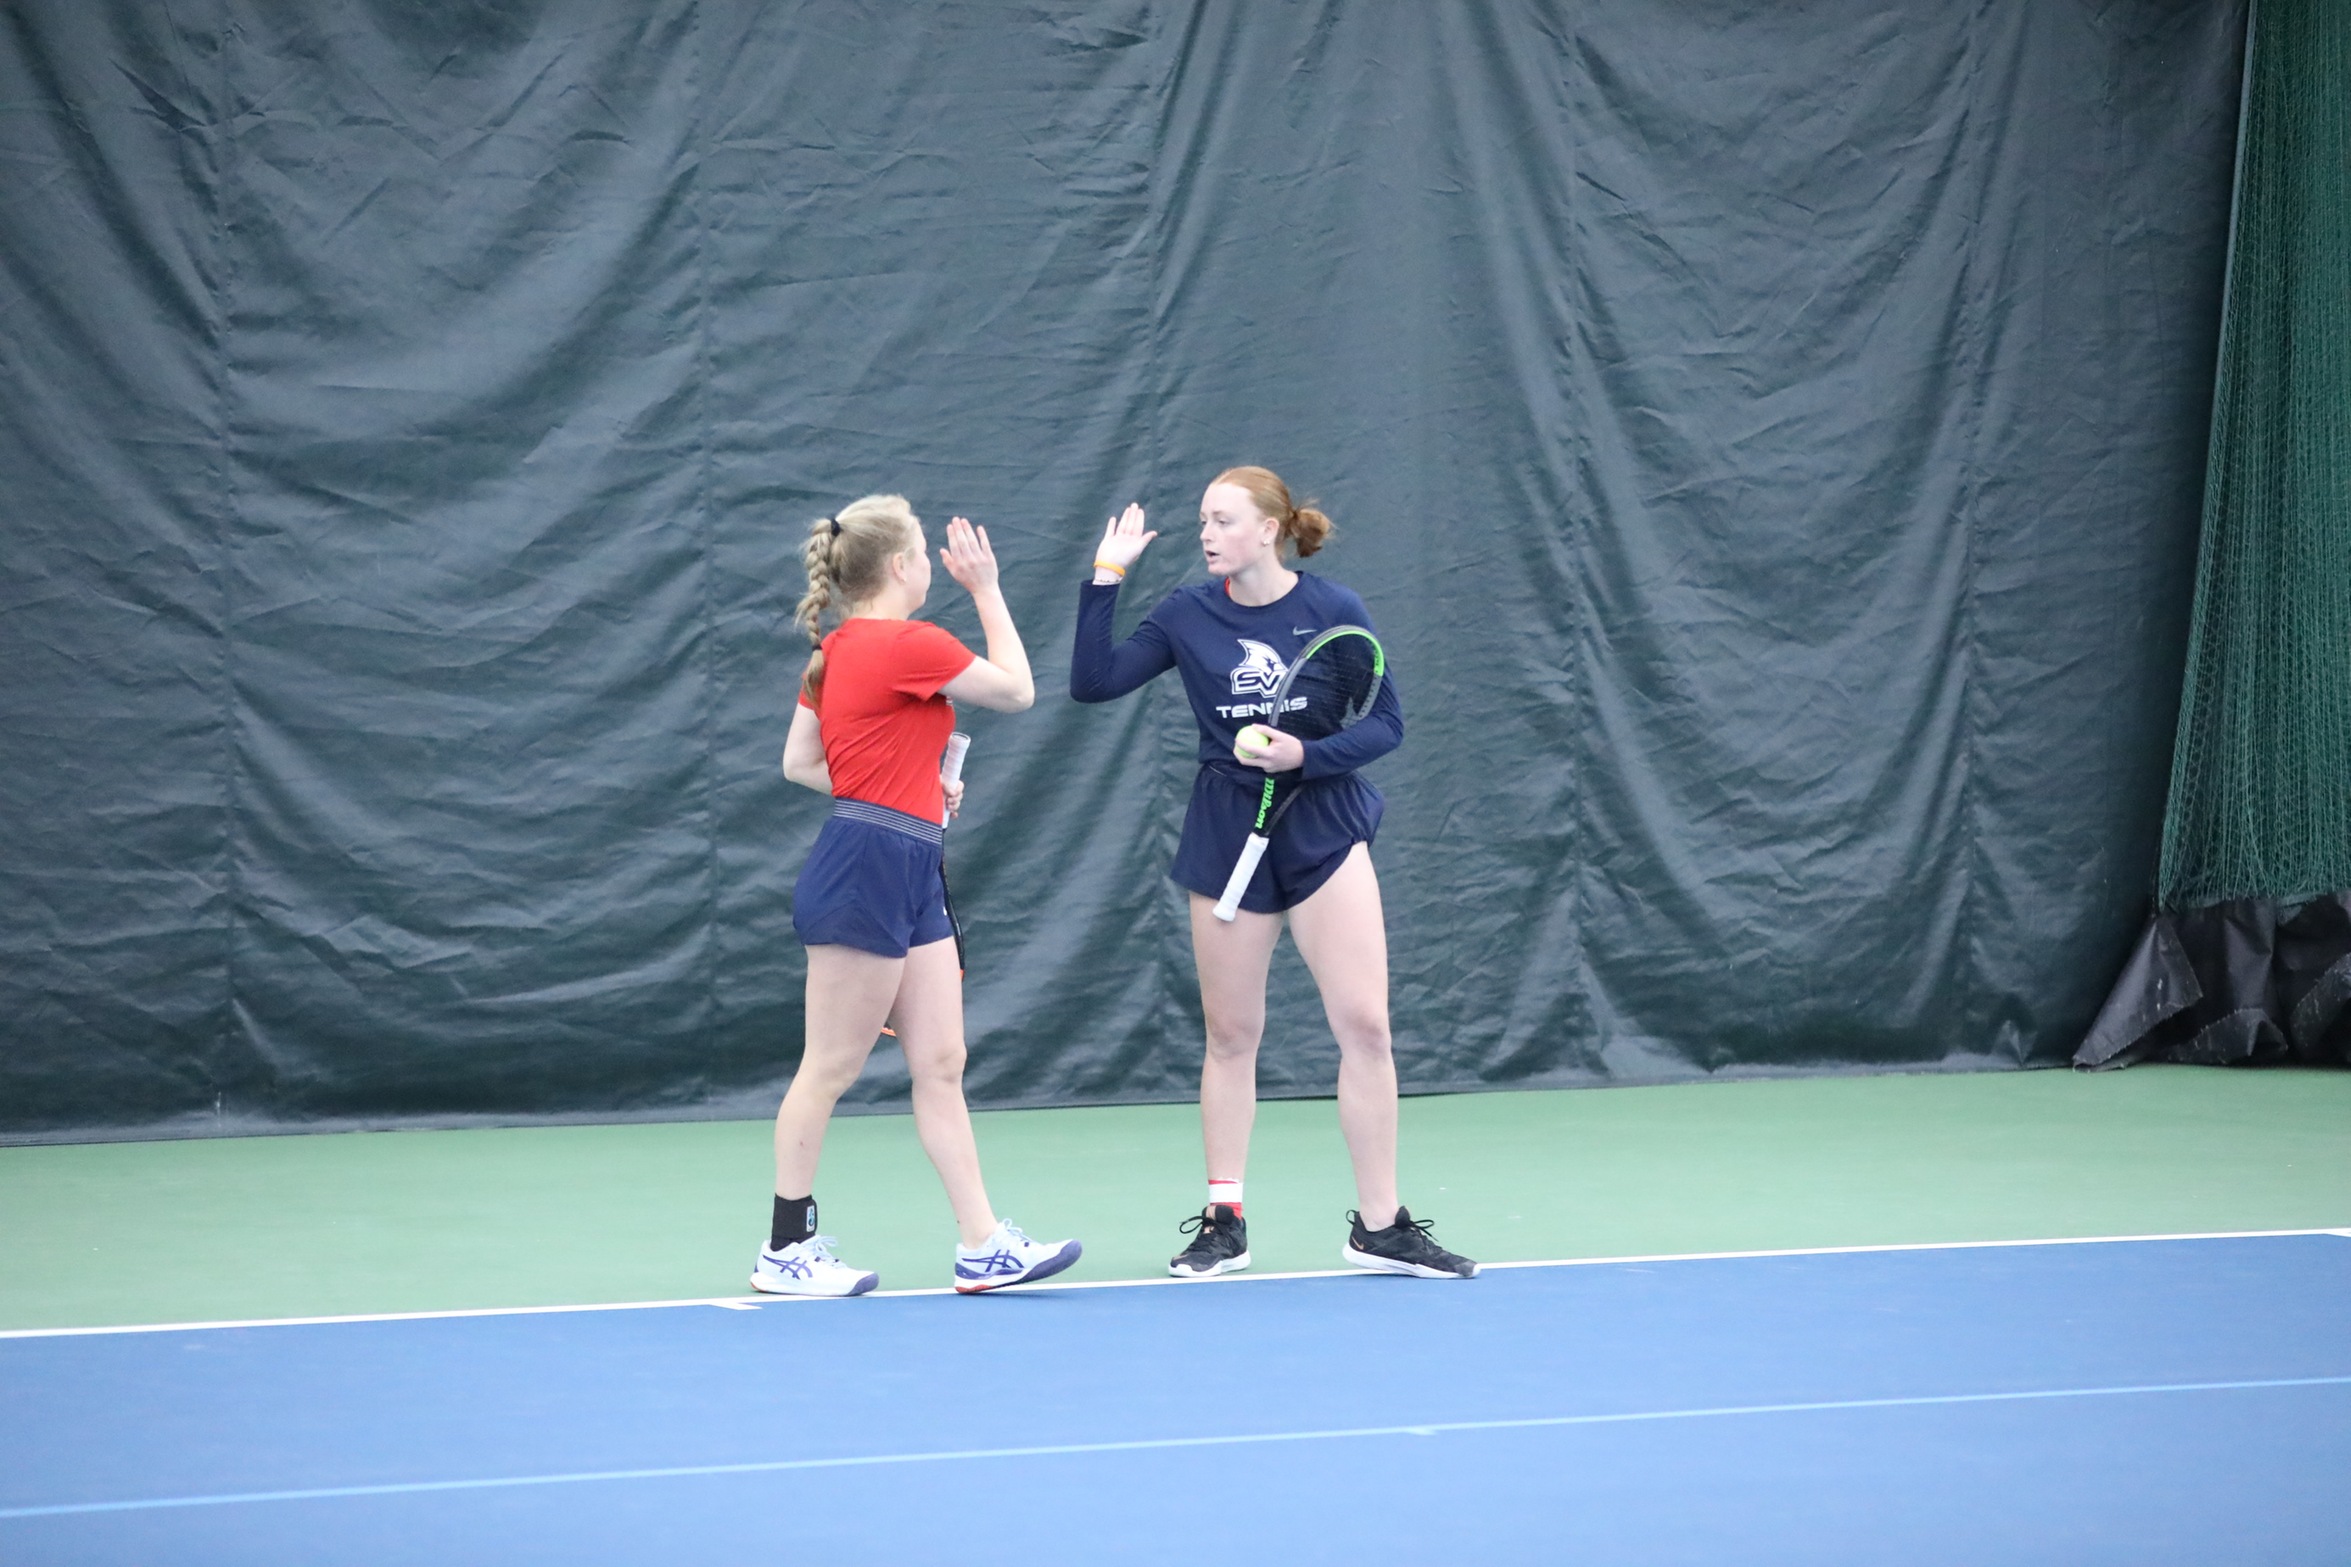 Amelia Dickson and Johanna Michahelles Win Flight C Doubles Final on Day Two of ITA Tournament